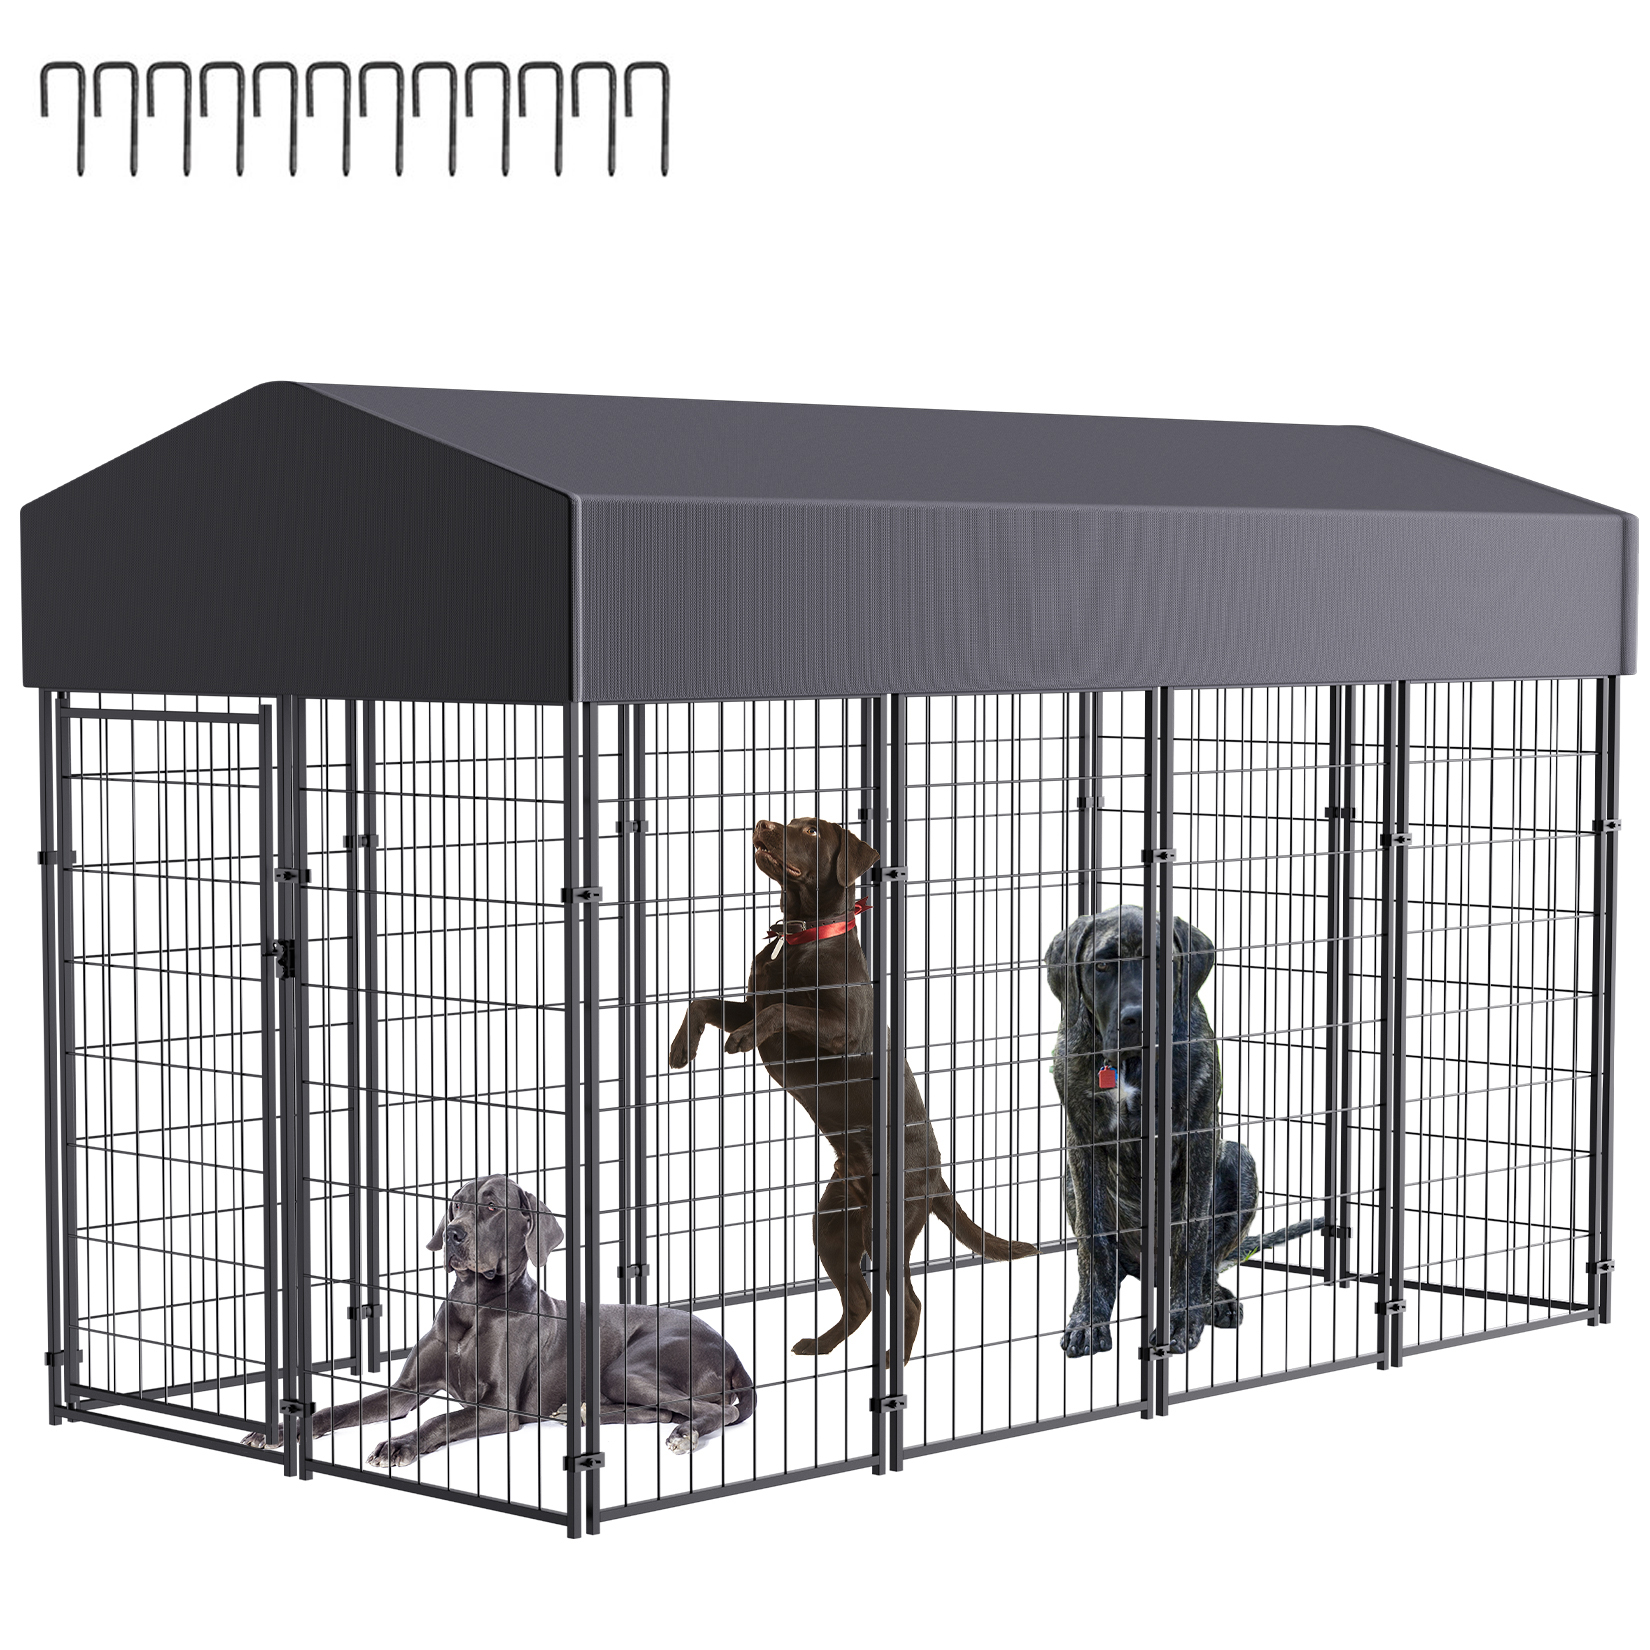 BingoPaw Playpen Welded Wire Dog Kennel W/ Cover, 8.2 ft. x 4 ft. x 5.4 ft - image 1 of 12